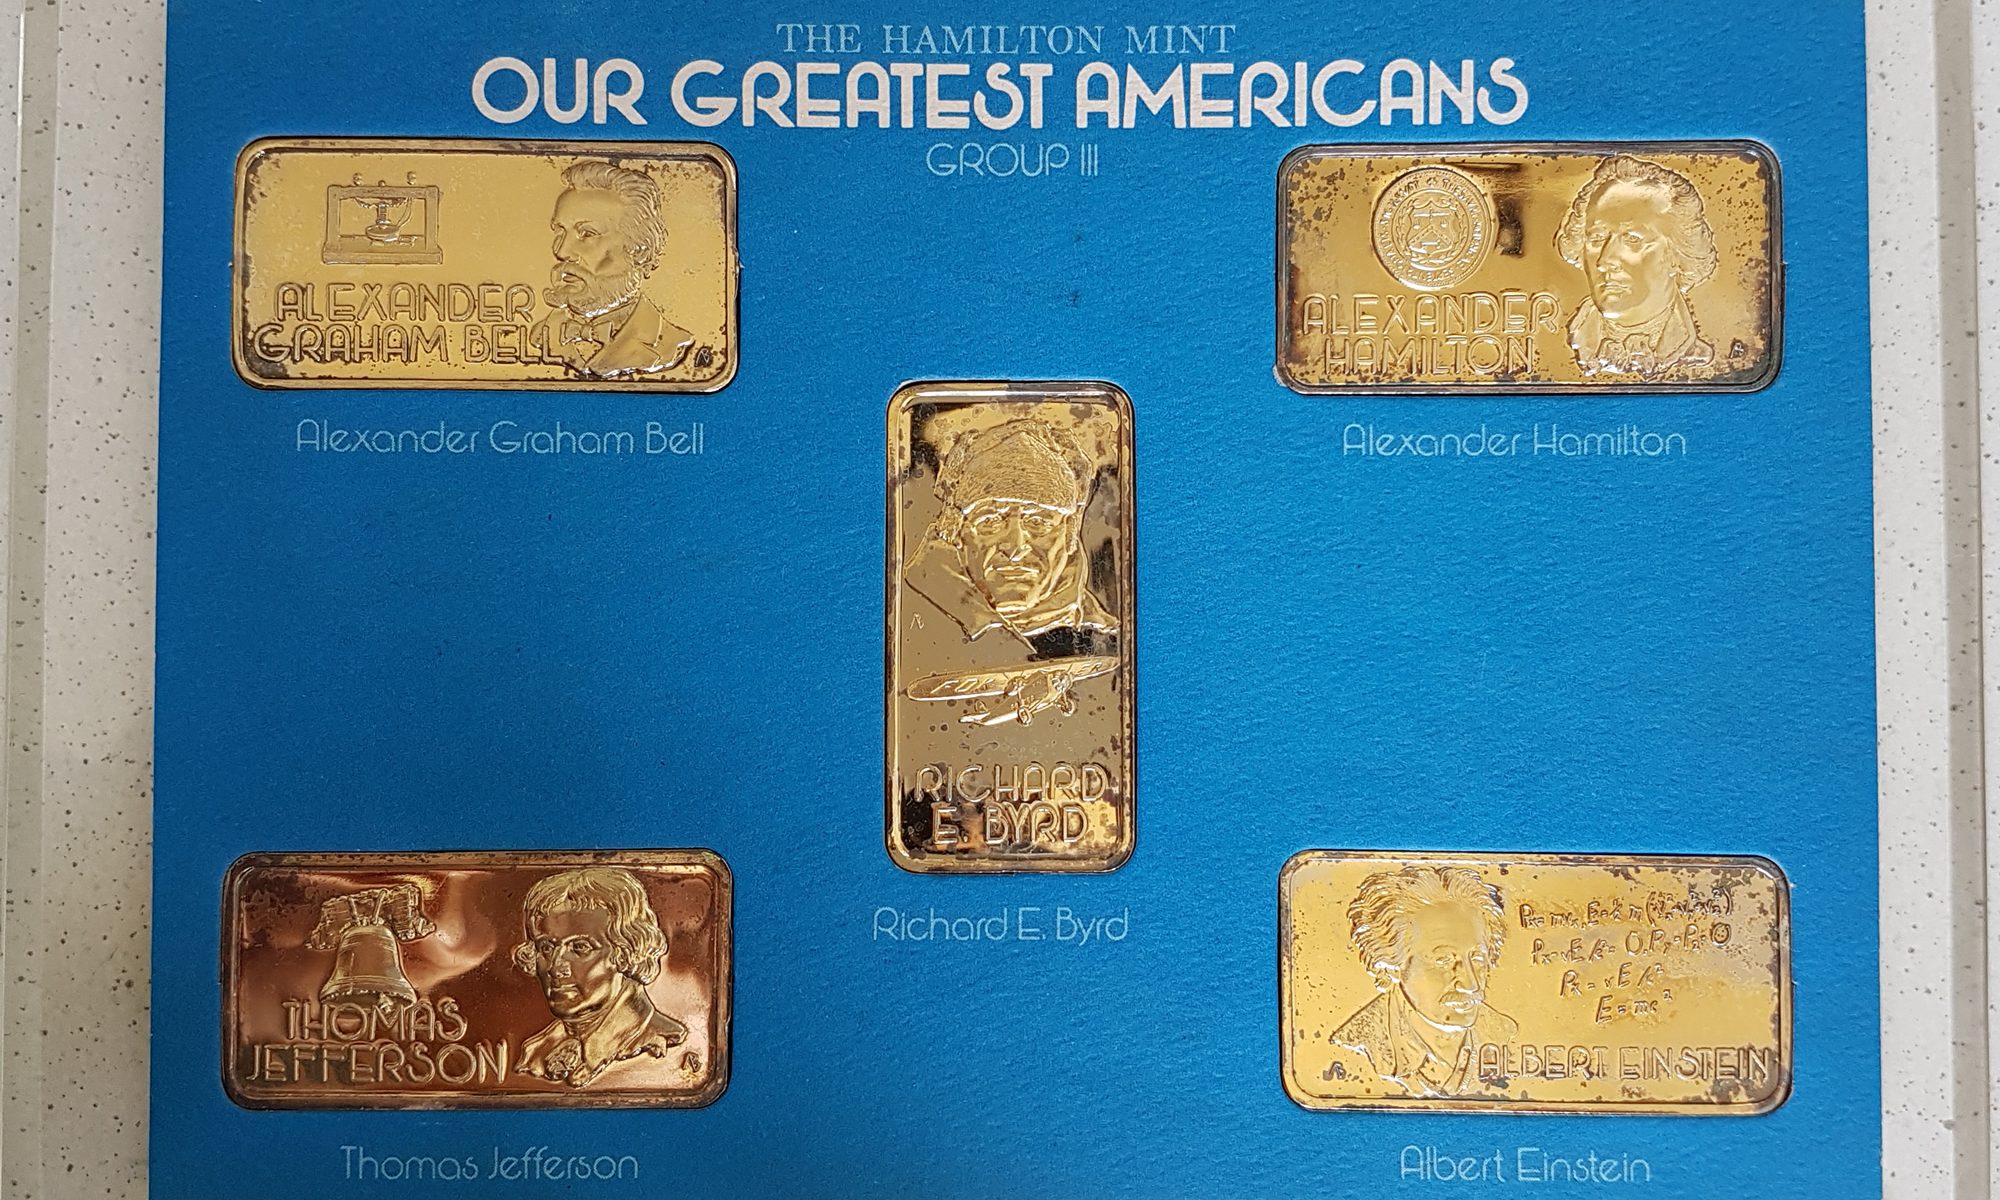 GROUP III: 5x1 TROY OZ .999 SILVER BARS by HAMILTON MINT - OUR GREATEST AMERICAN